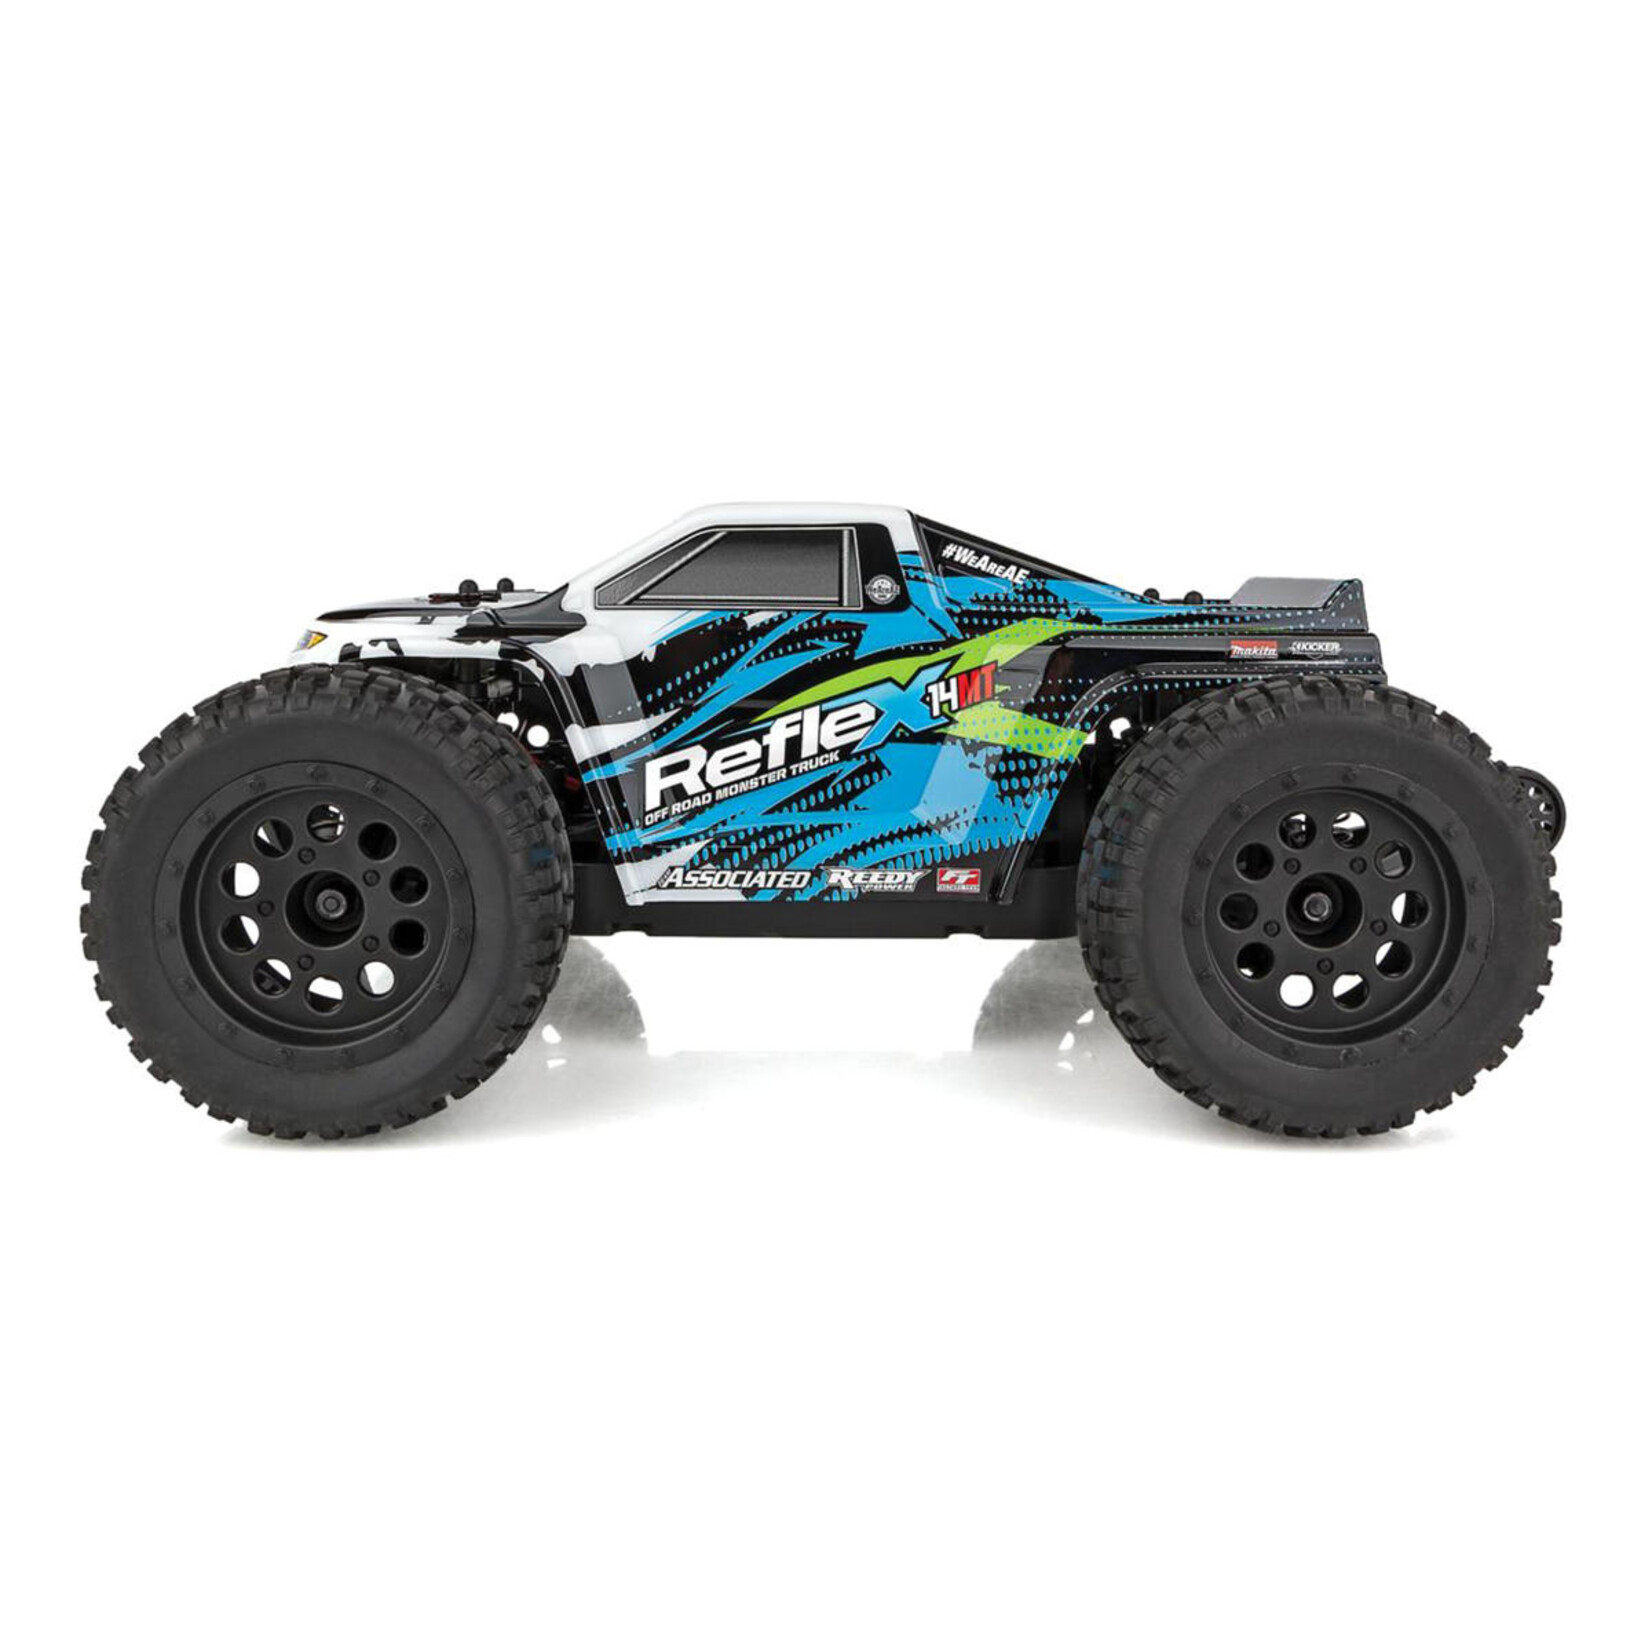 Team Associated Team Associated Reflex 14MT 1/14 RTR 4WD Brushless Mini Monster Truck Combo w/2.4GHz Radio, Battery & Charger #20174C